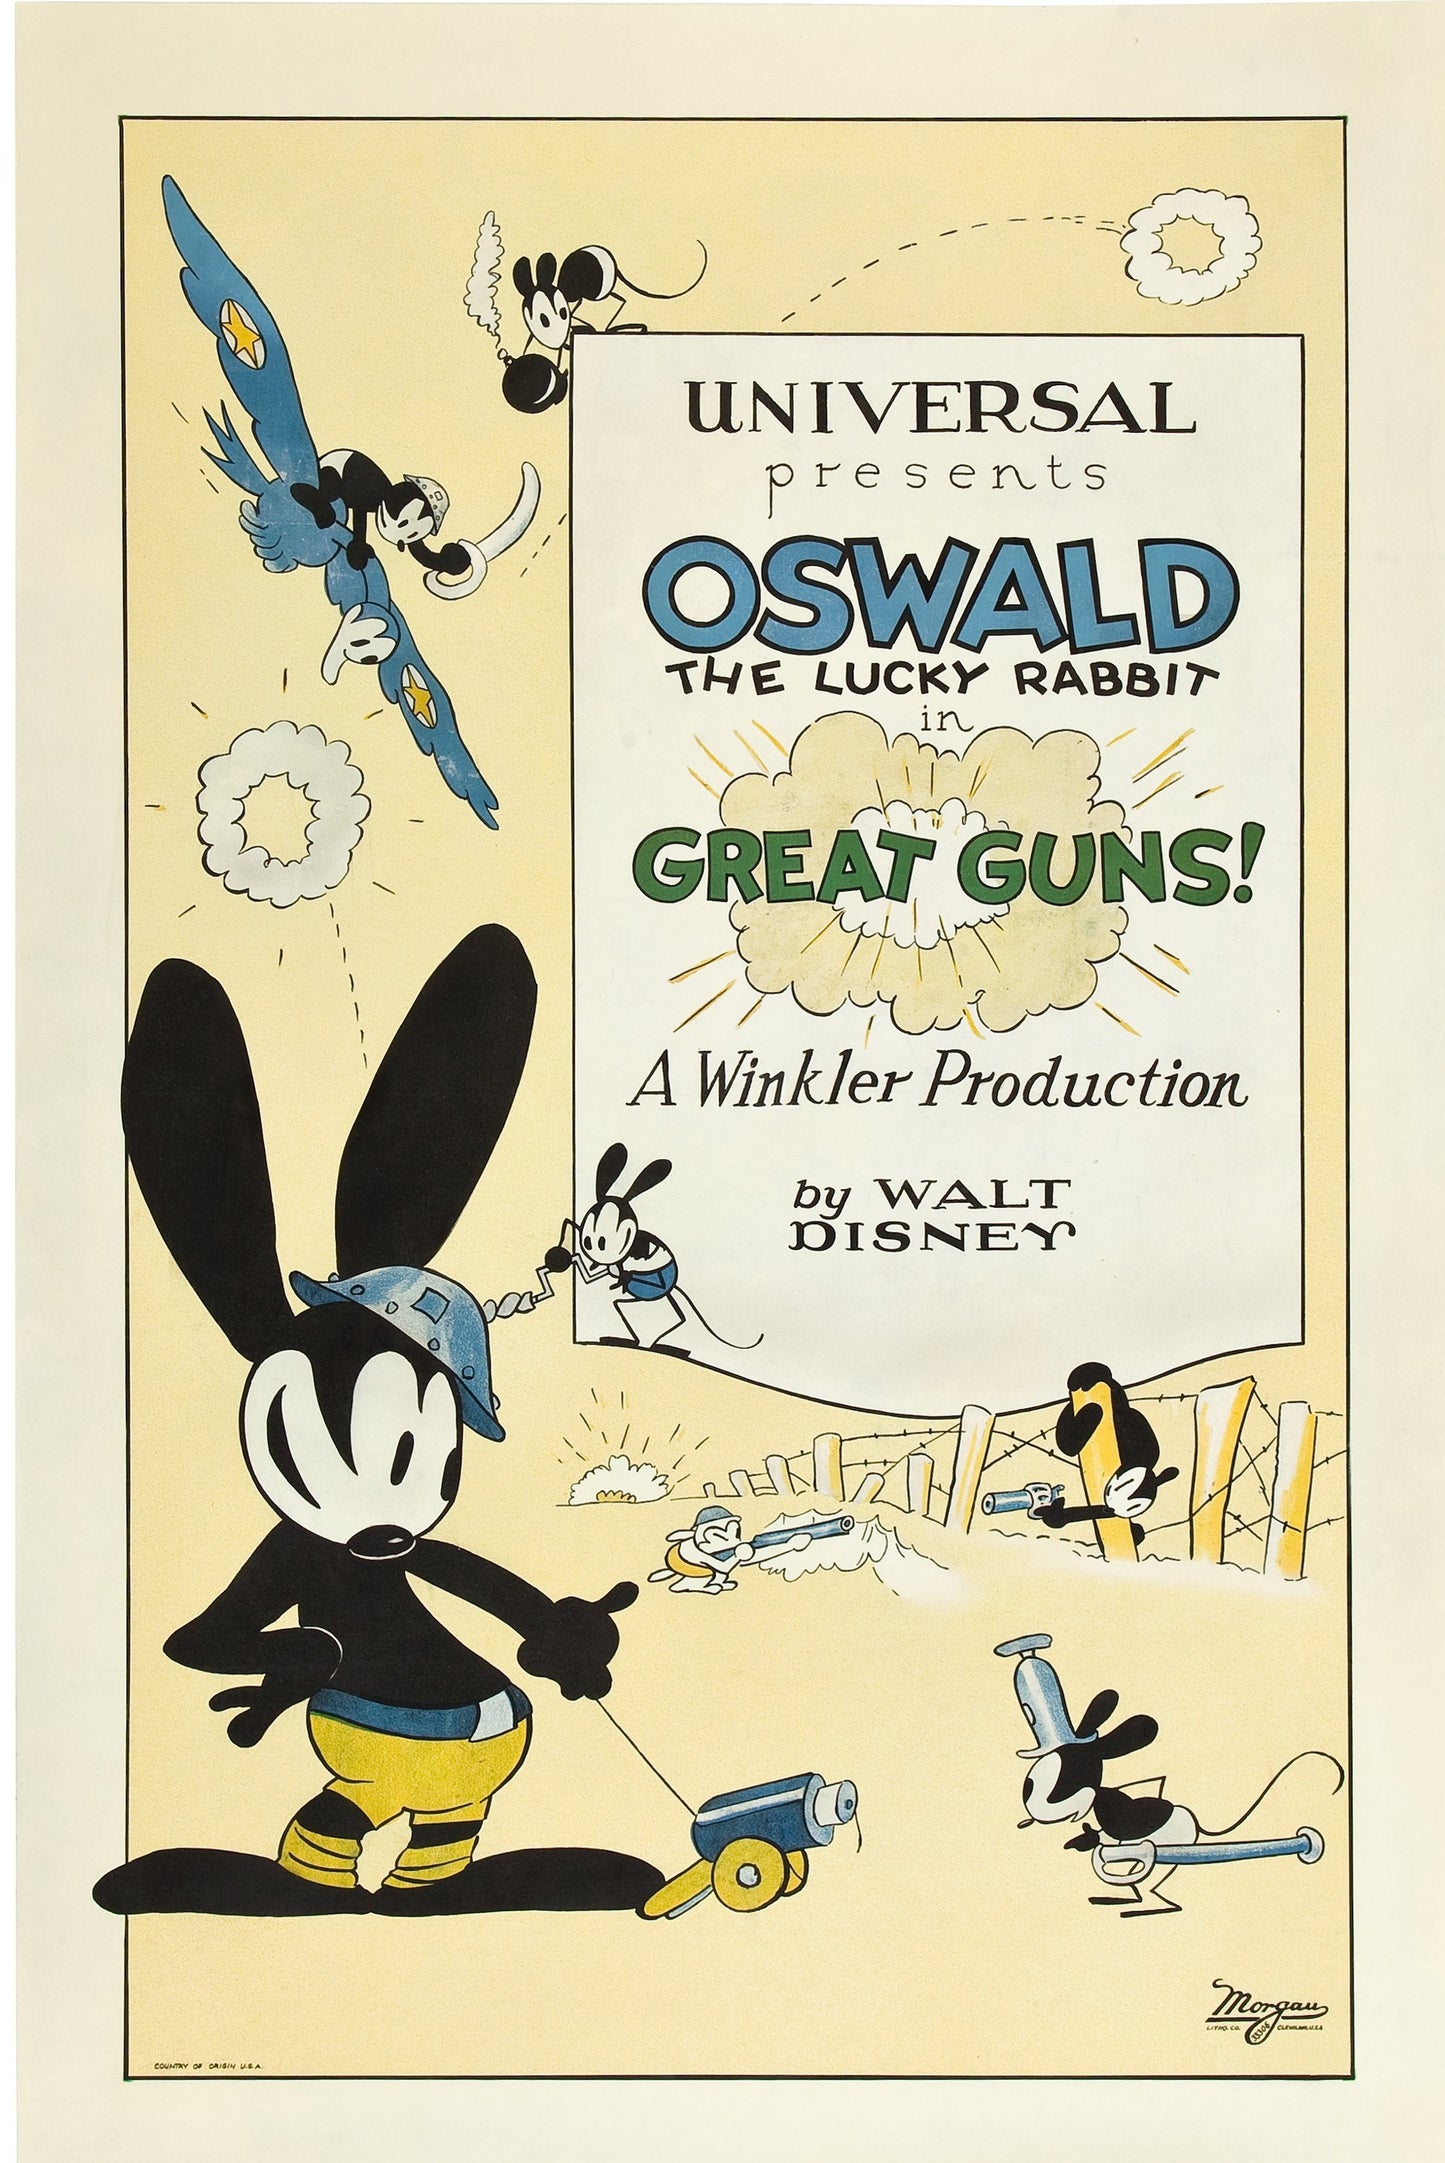 Oswald the lucky rabbit "Great Guns" poster (1920s) | Walt Disney Old Cartoon Movies Posters, Prints, & Visual Artwork The Trumpet Shop Vintage Prints   